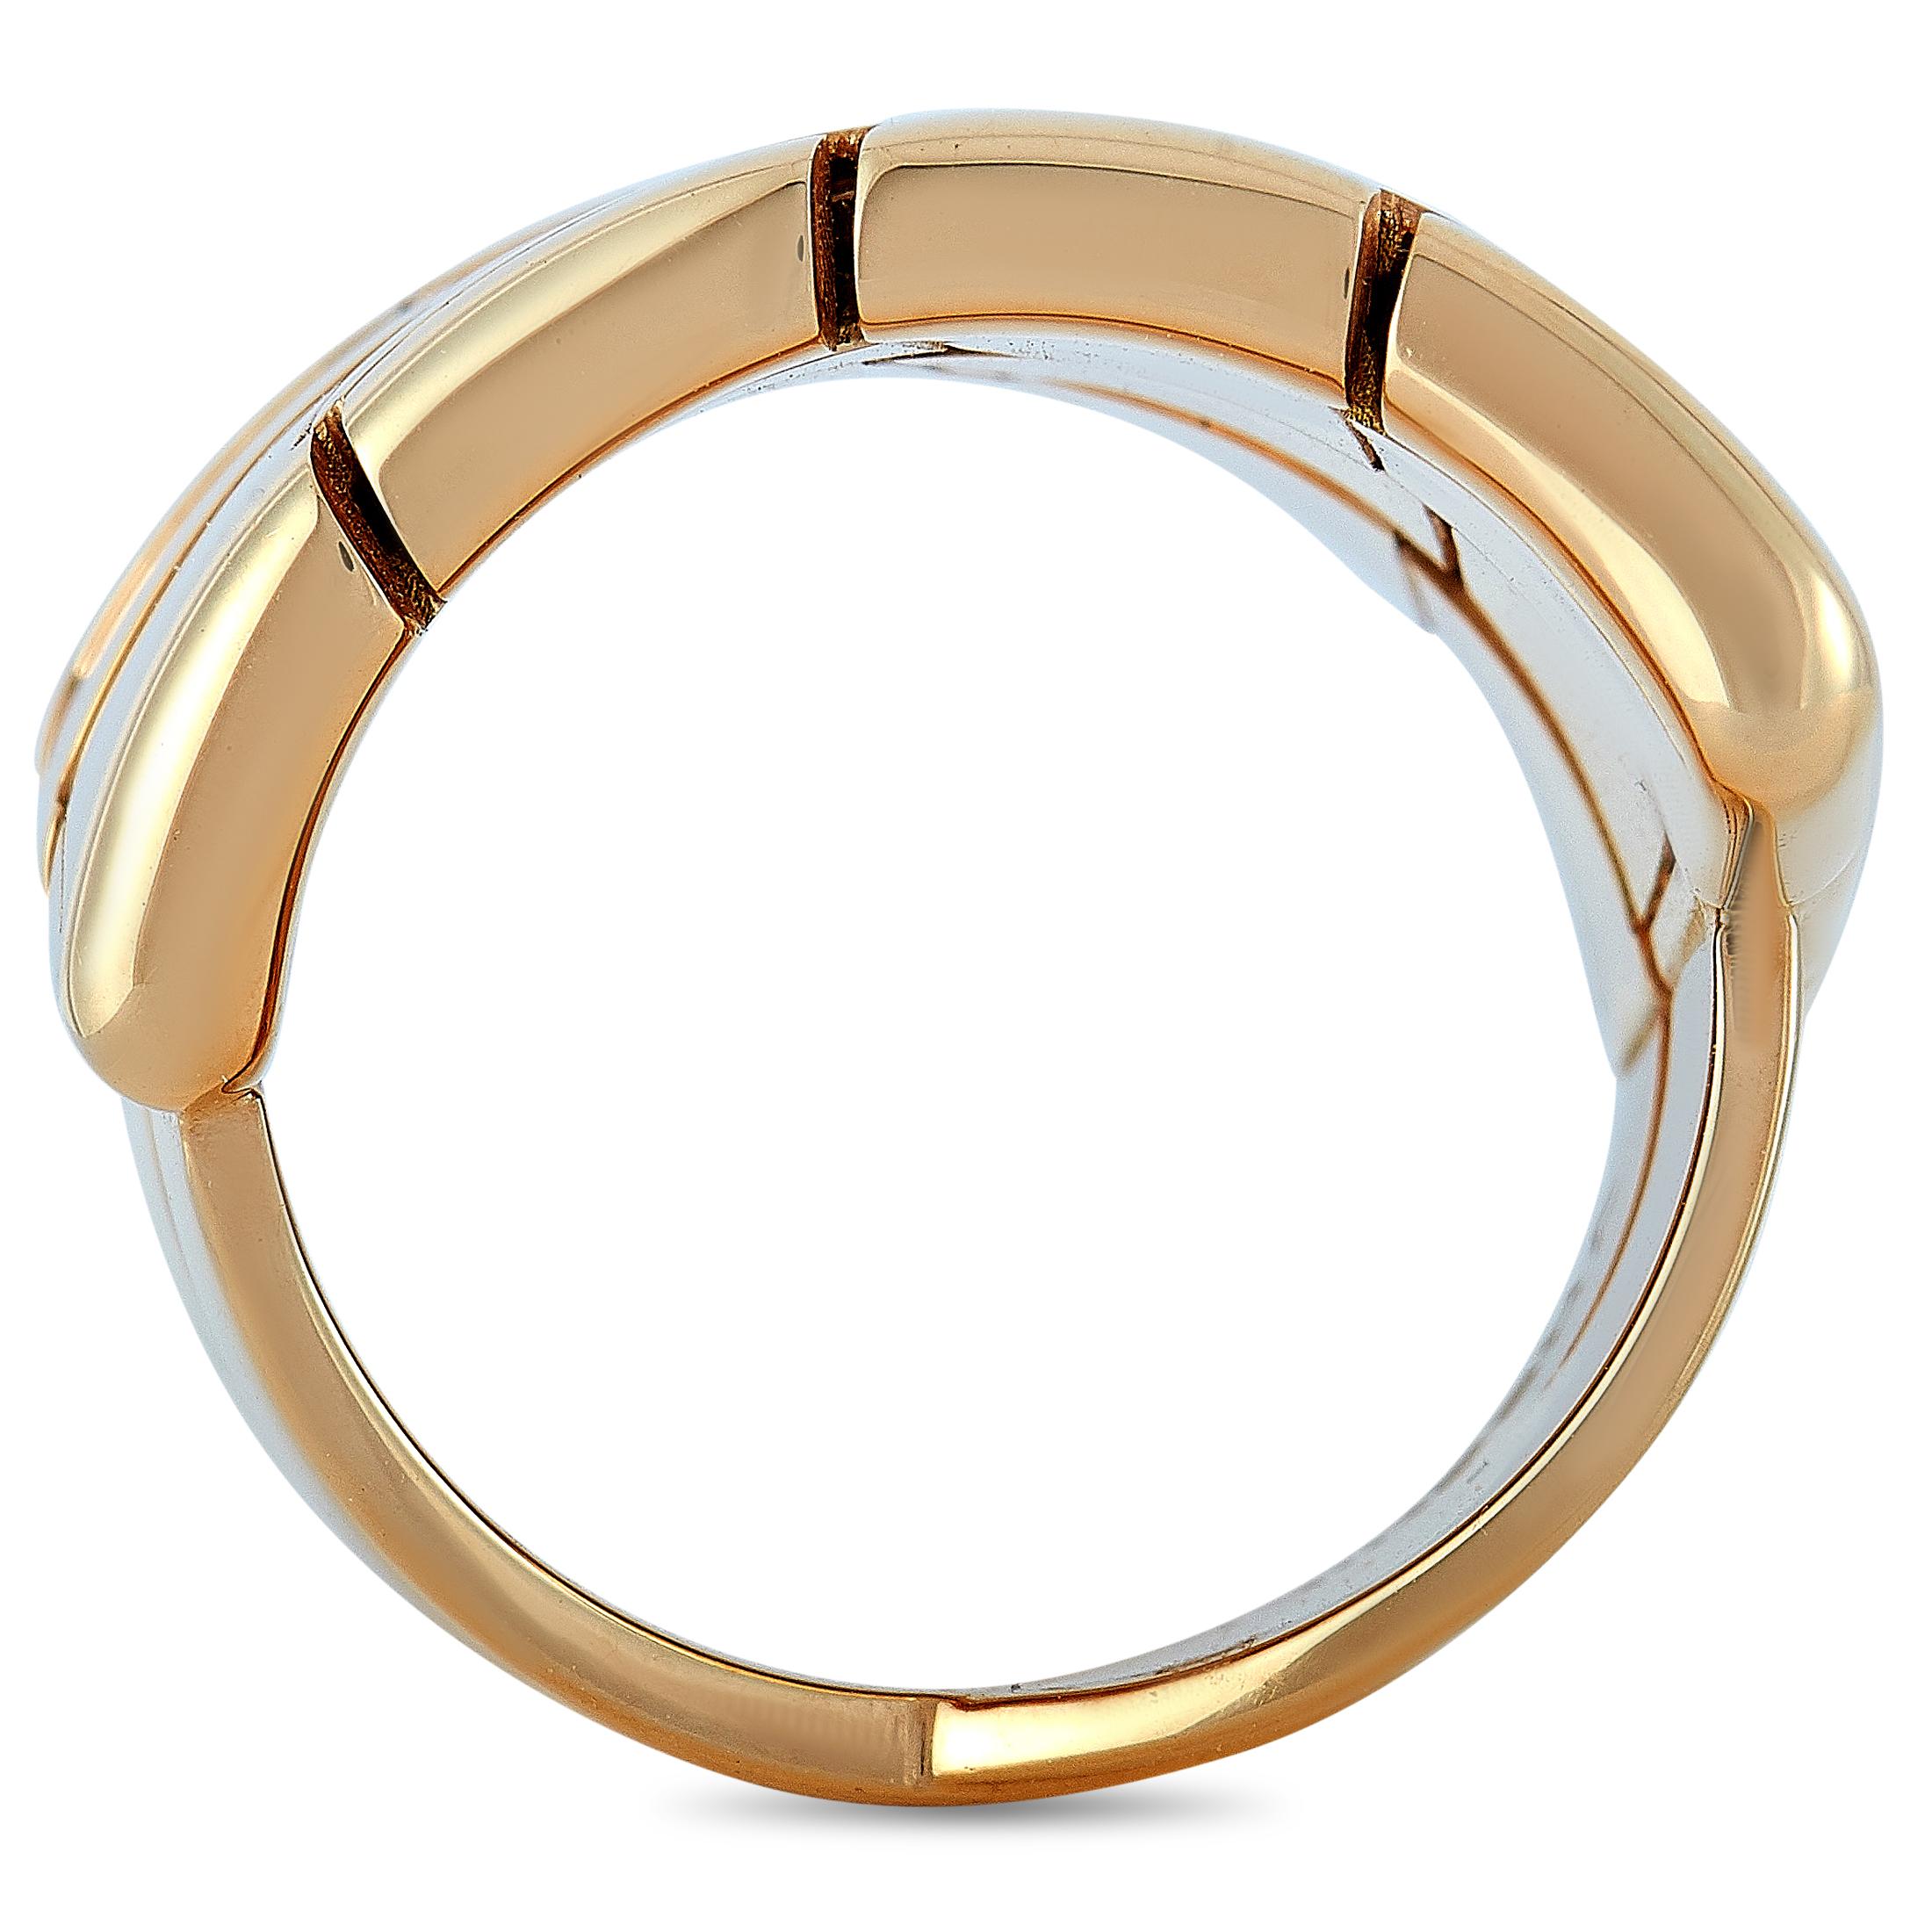 The Vhernier “Giunco Due” ring is crafted from 18K rose gold and weighs 18.1 grams. The ring boasts band thickness of 6 mm and top height of 3 mm, while top dimensions measure 22 by 23 mm.
Ring Size: 6

This item is offered in brand new condition